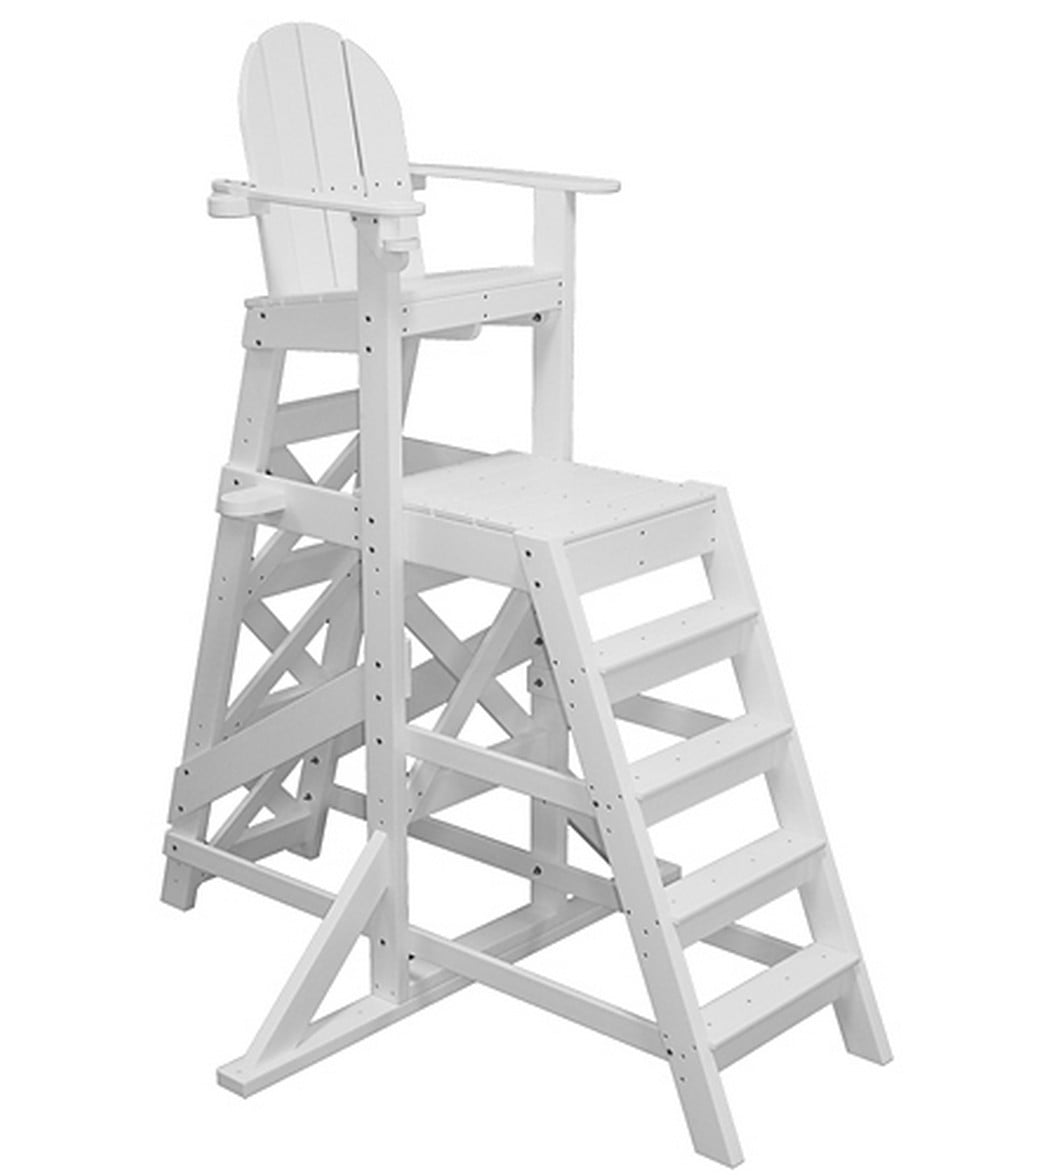 Tailwind Tall Recycled Plastic Lifeguard Chair w/Front